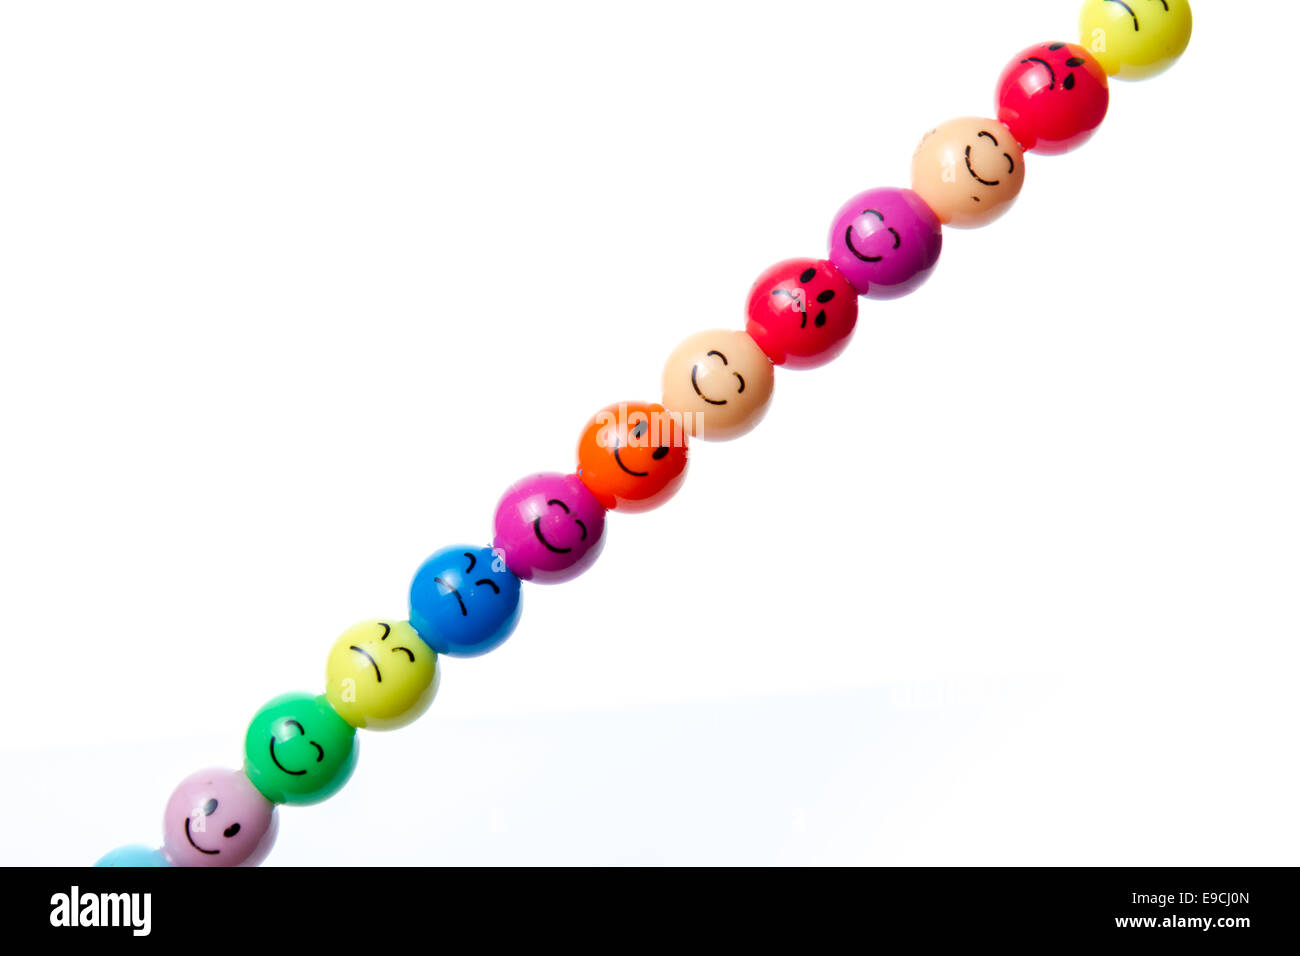 Smiley faces with various expressions on a pen Stock Photo